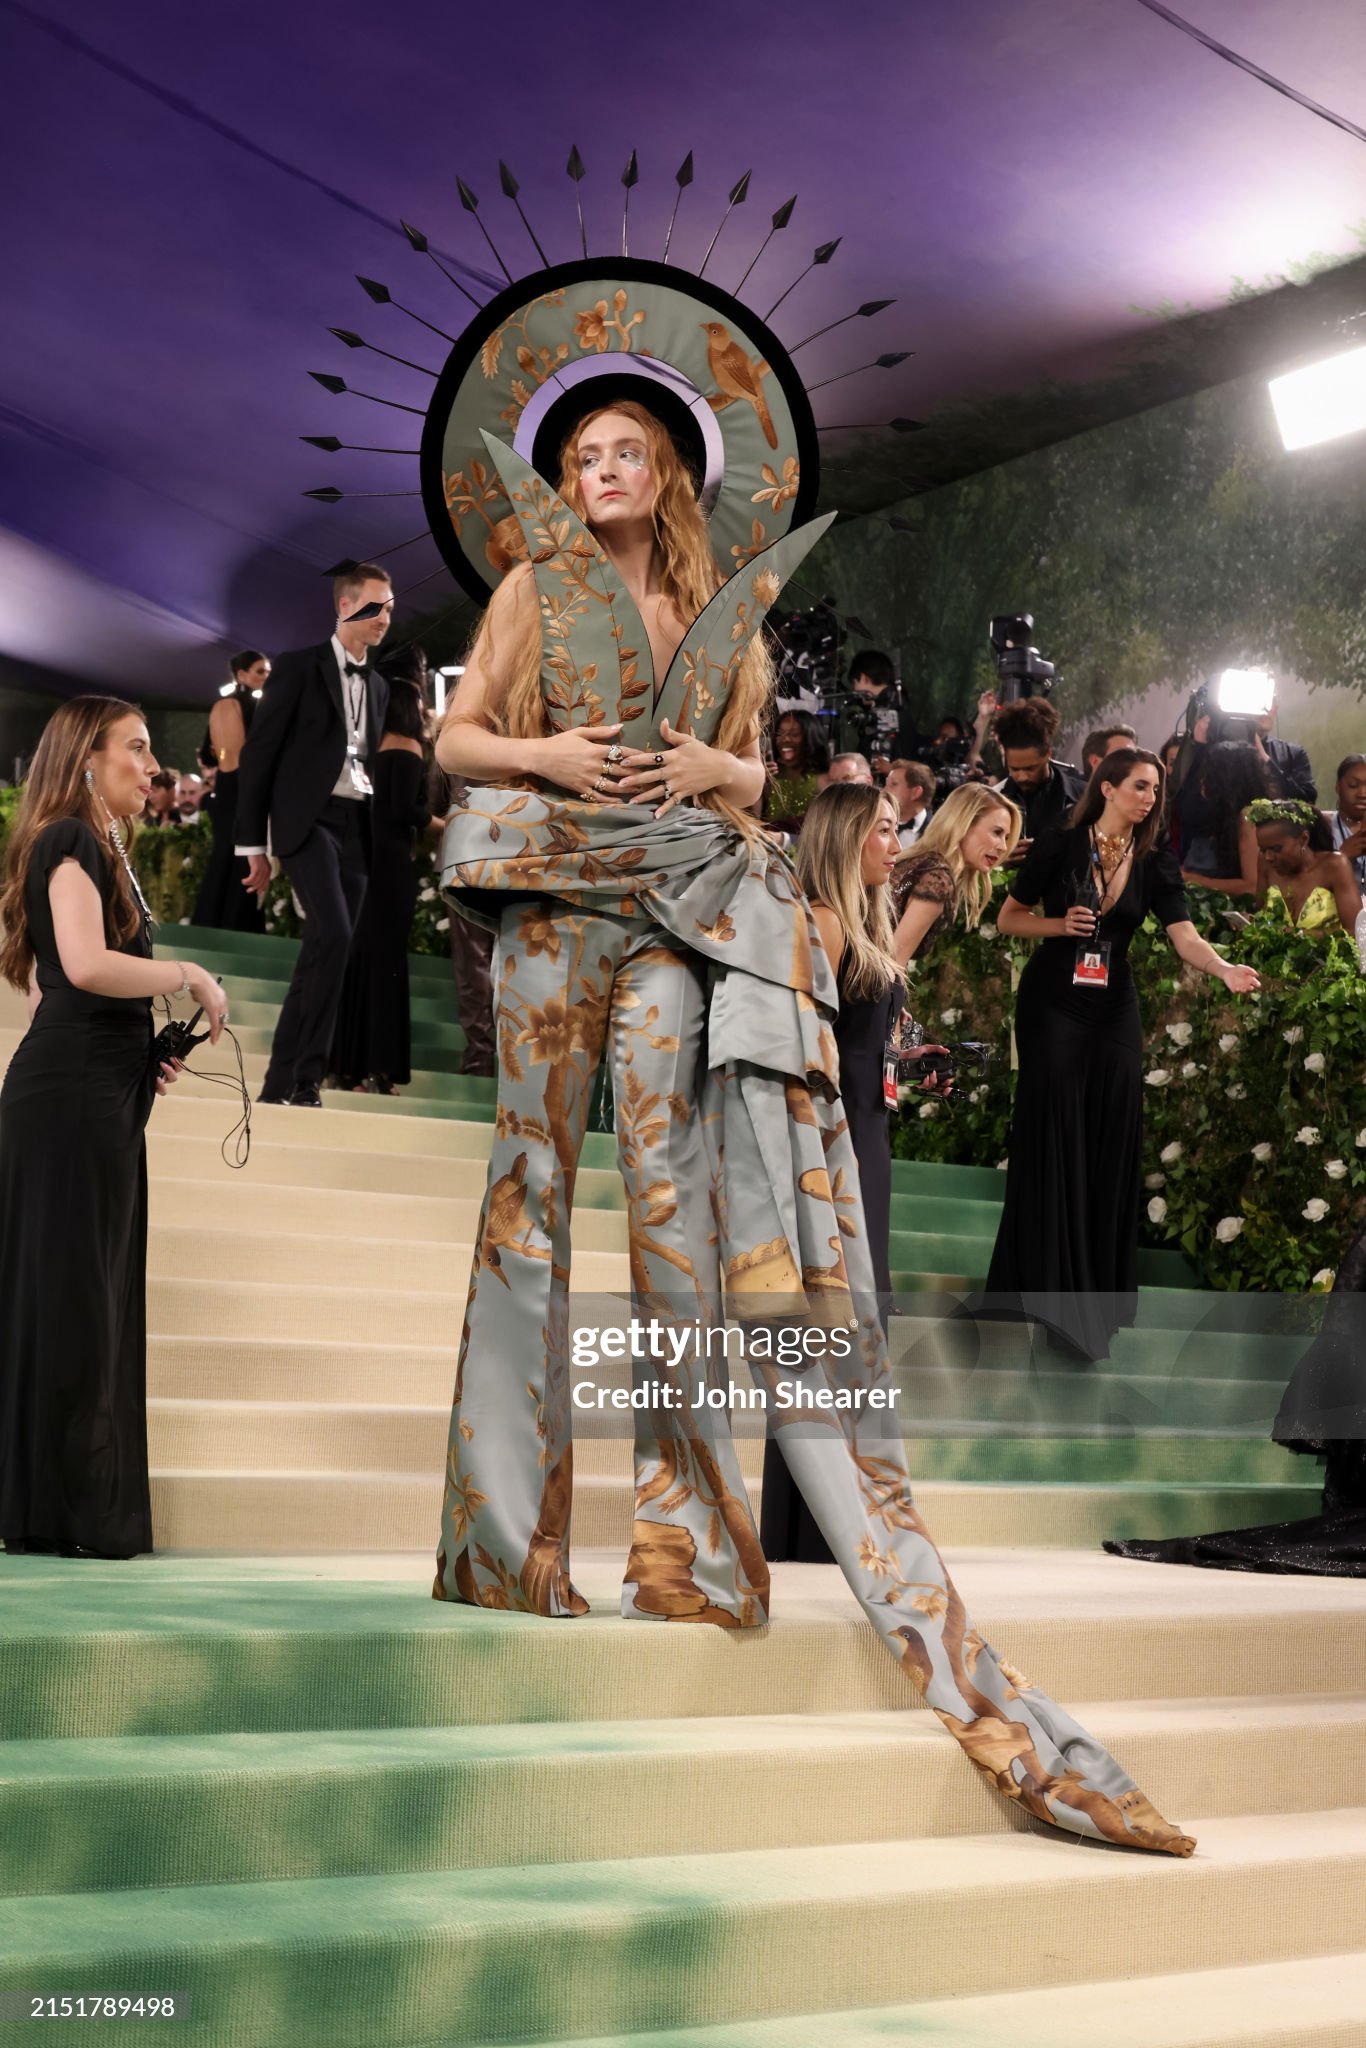 gettyimages-2151789498-2048x2048.jpg